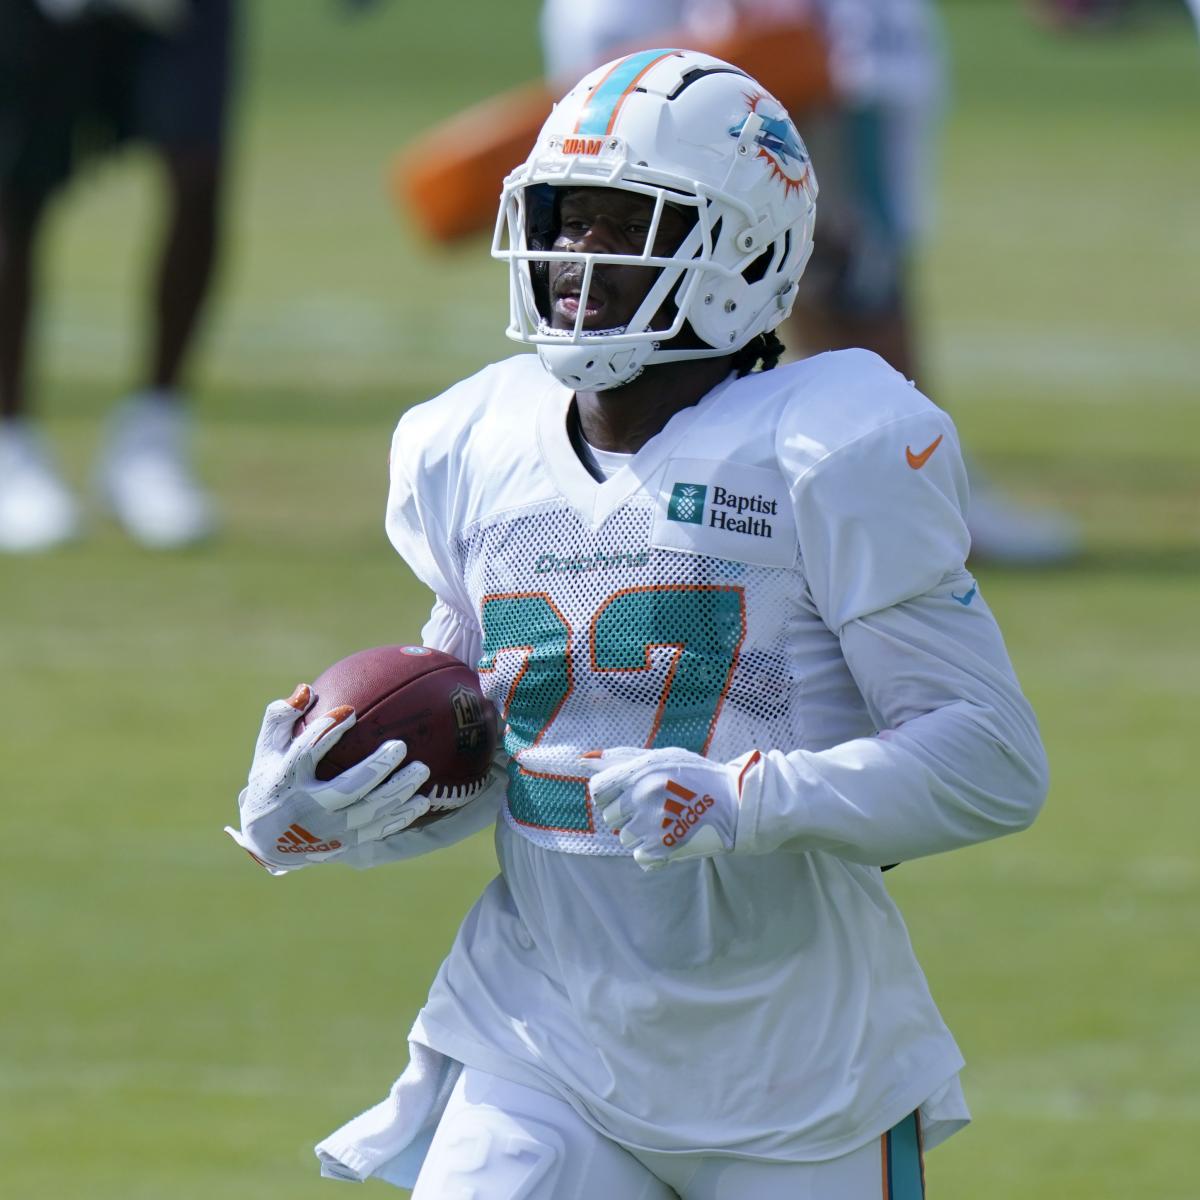 Report: Kalen Ballage's Trade to Jets from Dolphins off After Failed ...